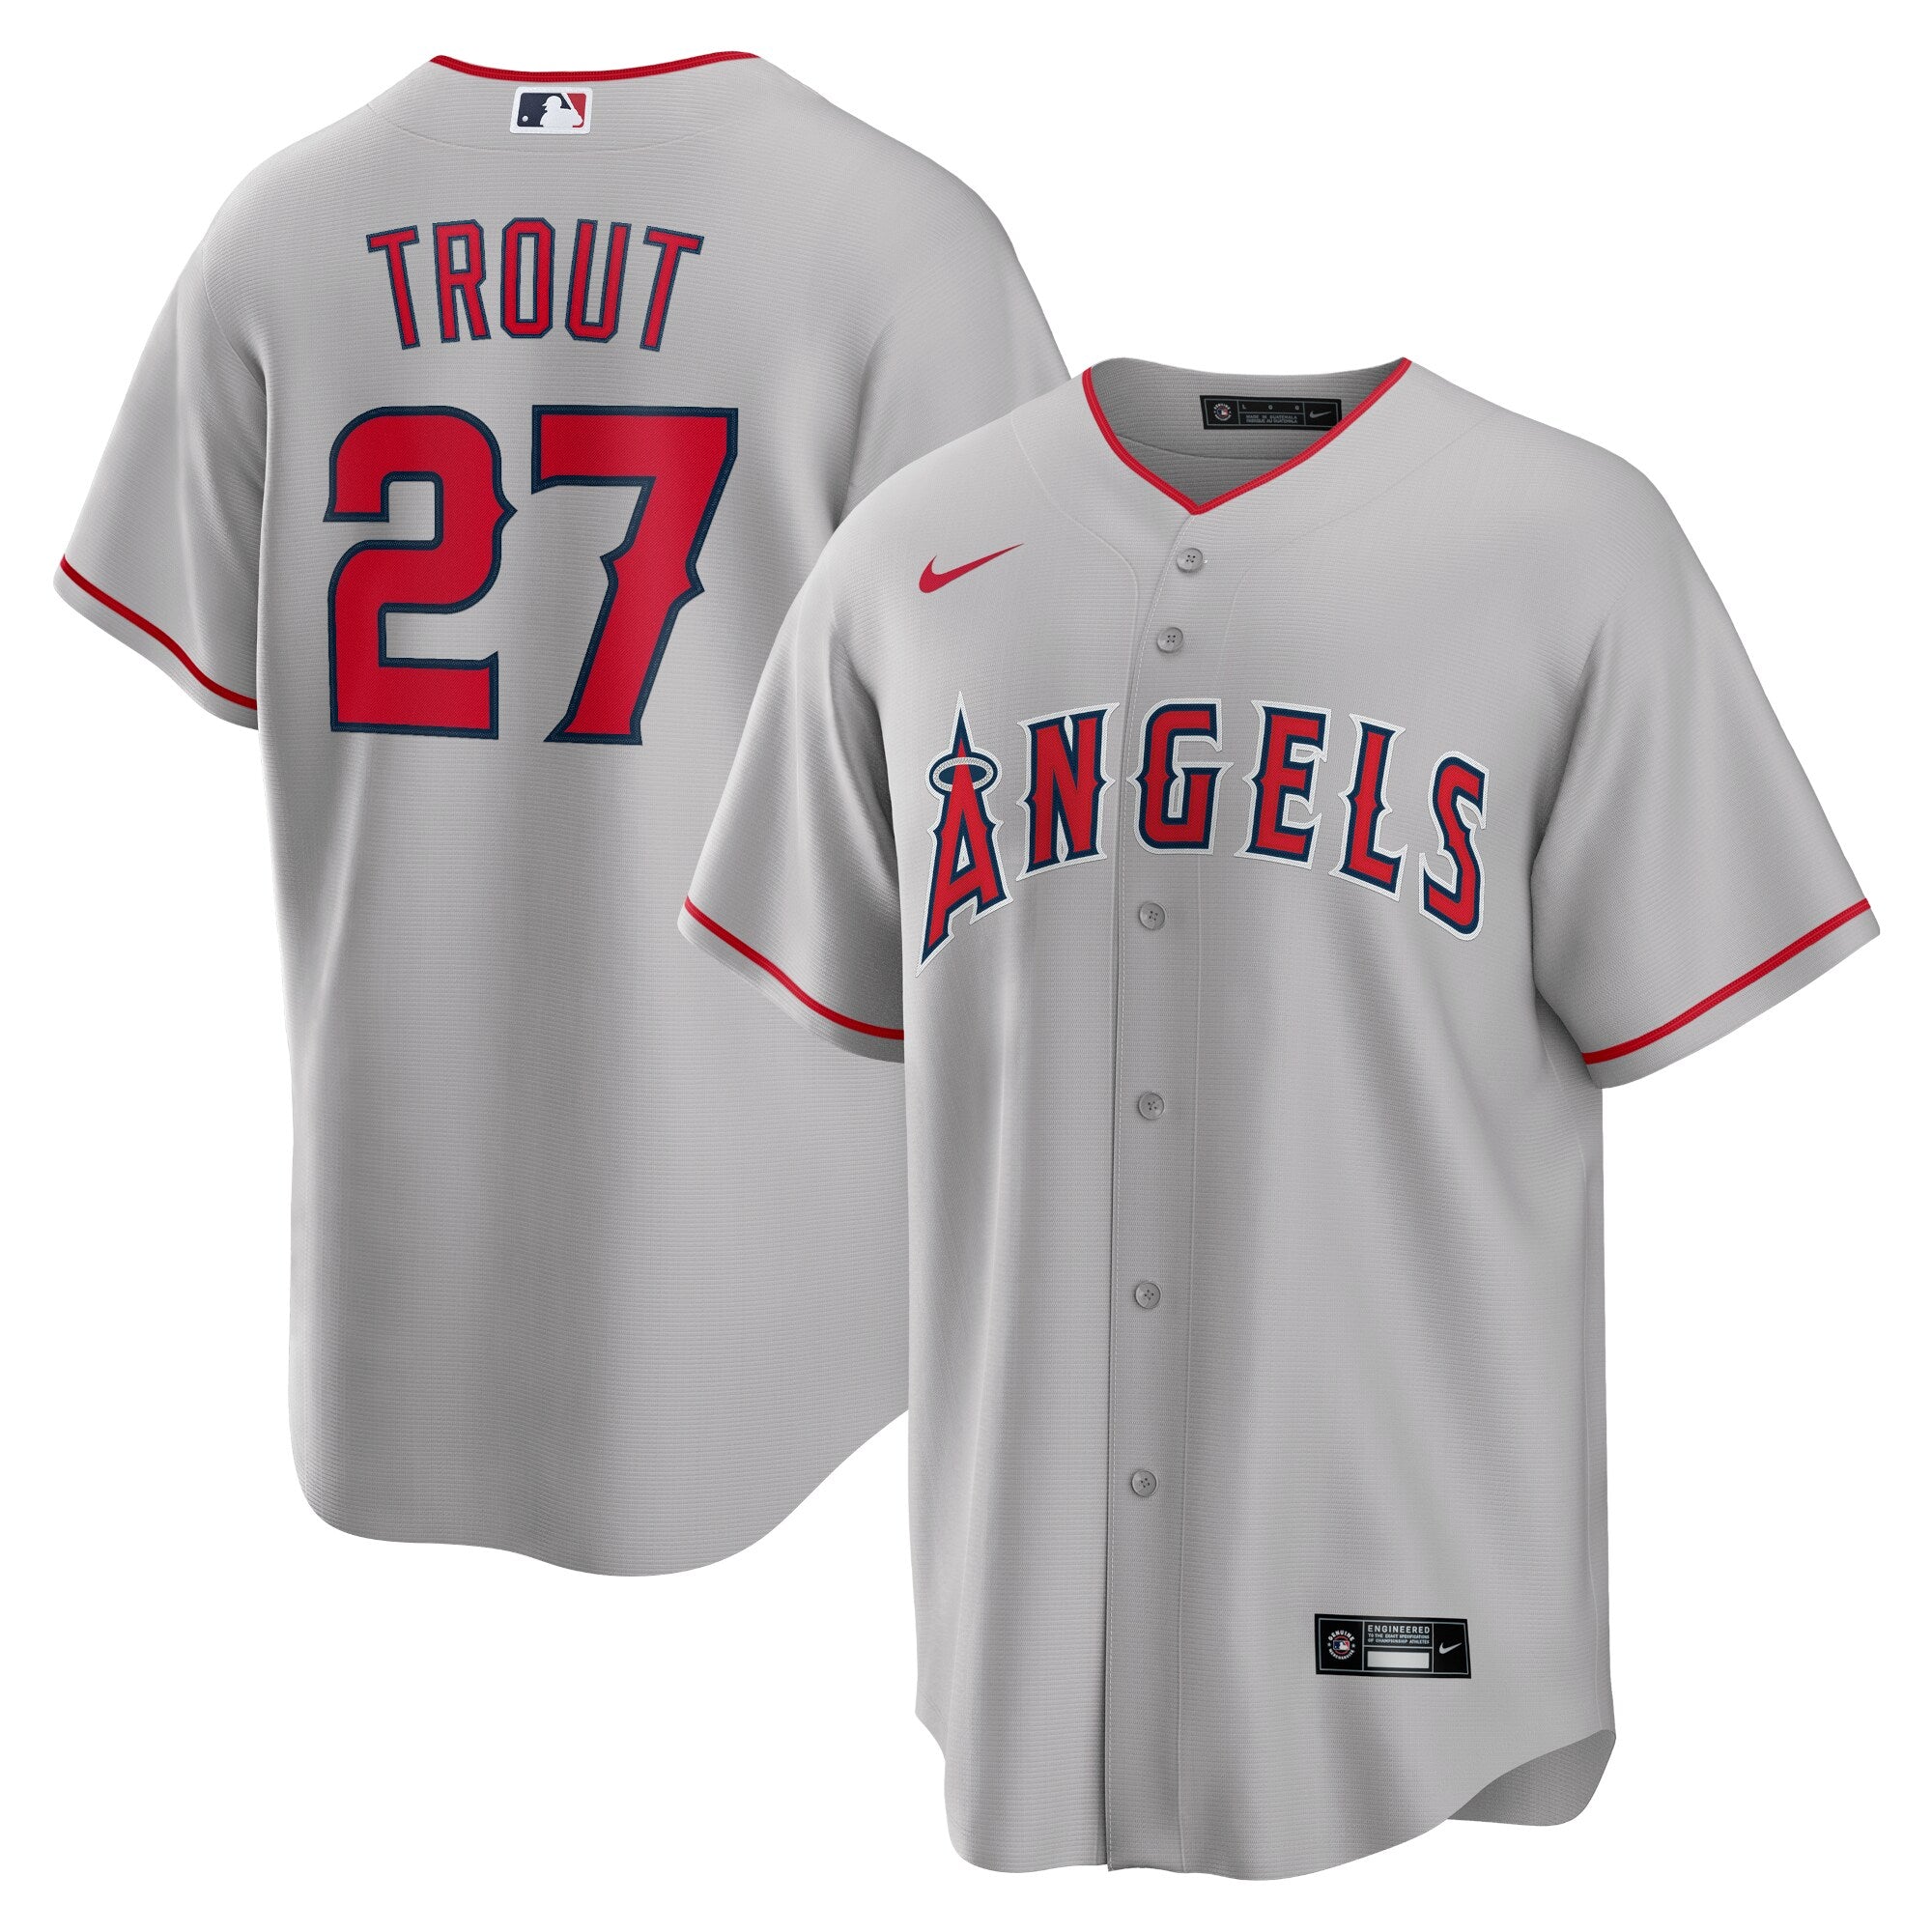 Nike Men's Los Angeles Angels Mike Trout Road Gray Replica Player Jersey